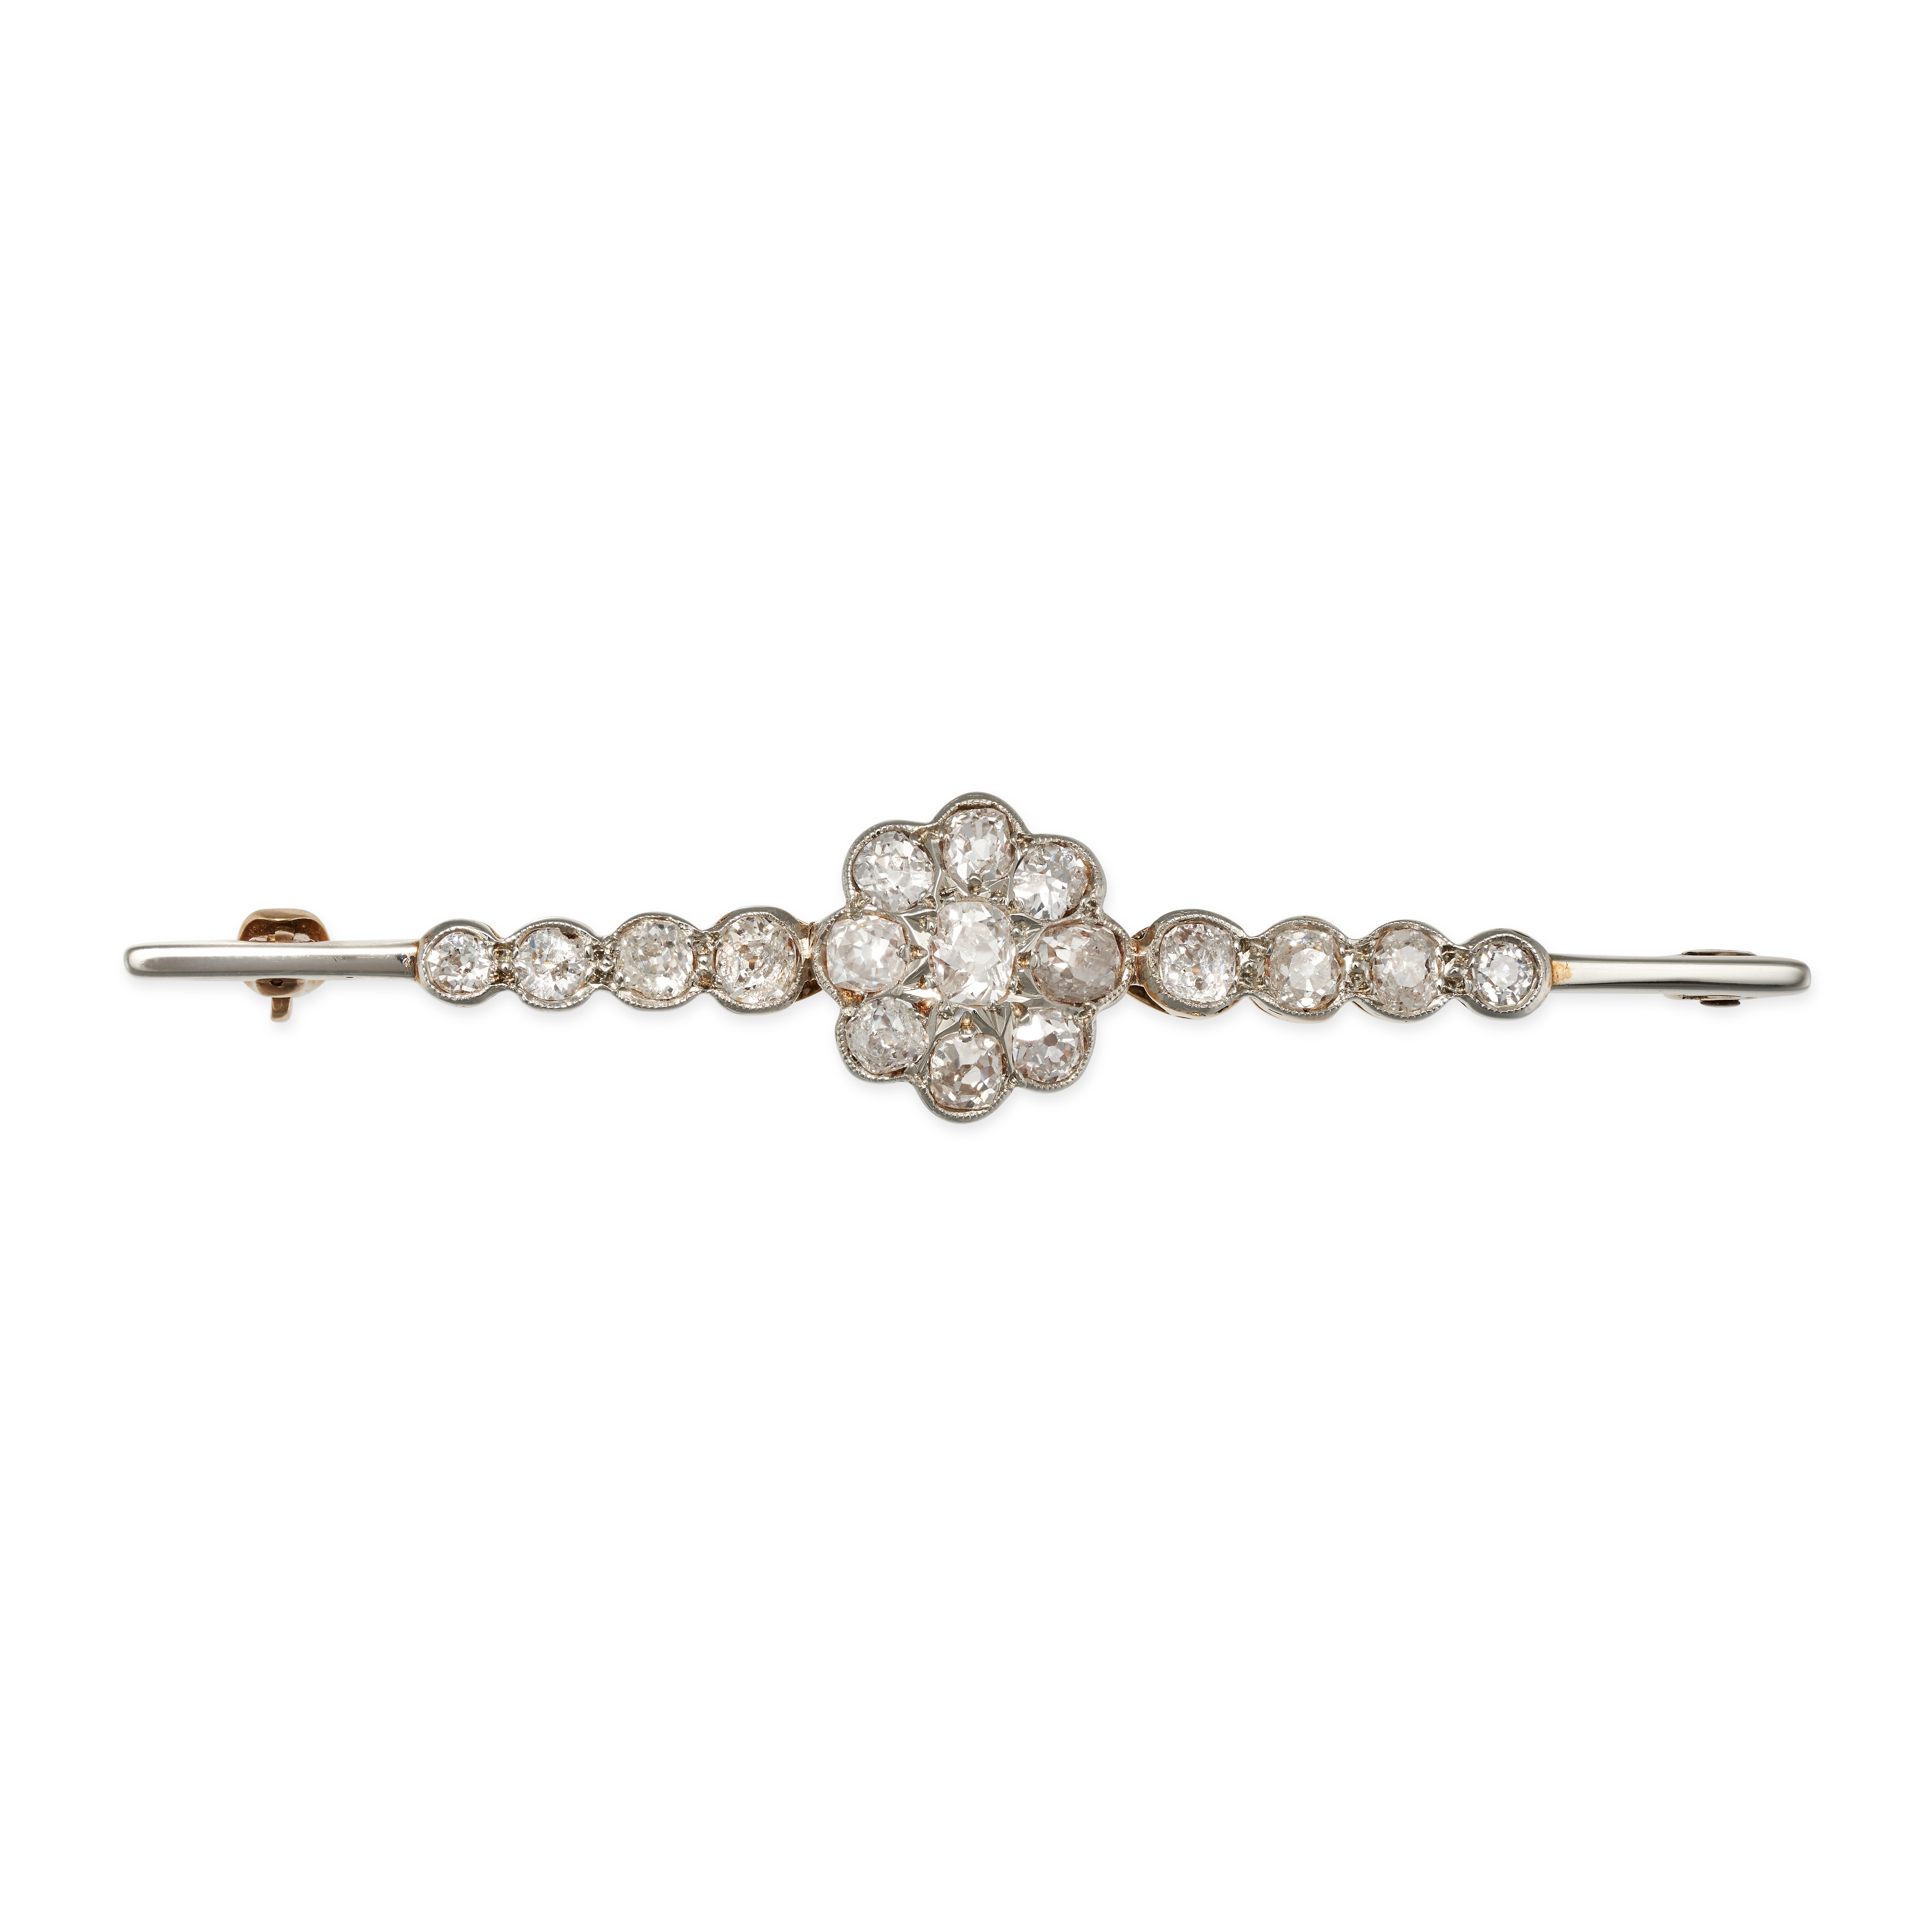 AN ANTIQUE DIAMOND BAR BROOCH in yellow gold, set with a cluster of old cut diamonds accented by ...